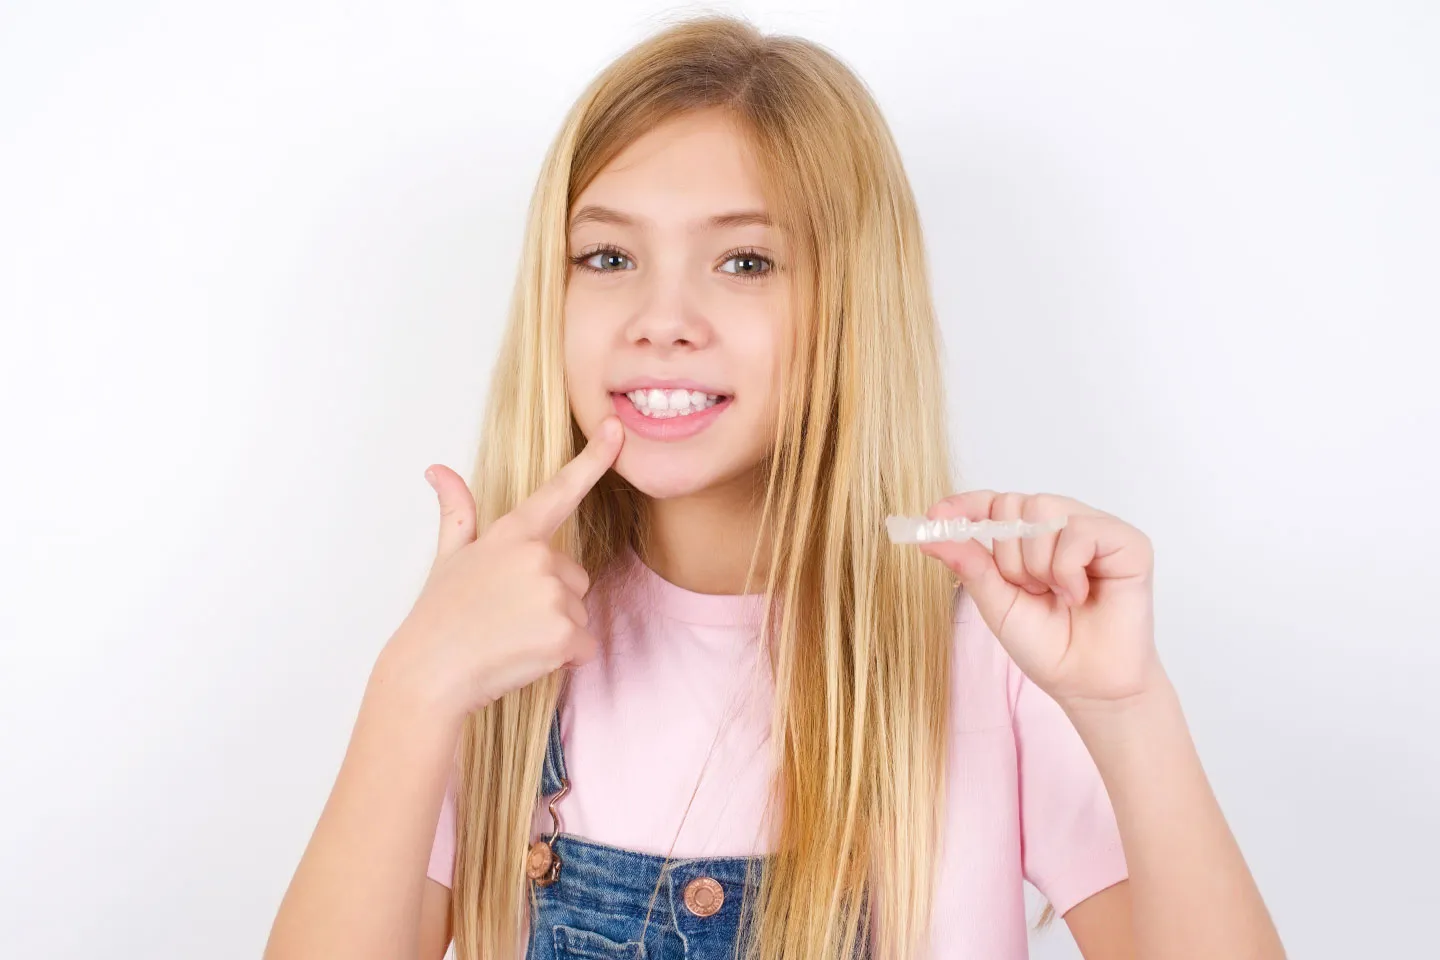 Get Invasalign clear aligner for teens in Bronx, NY at Dental Smile Savers